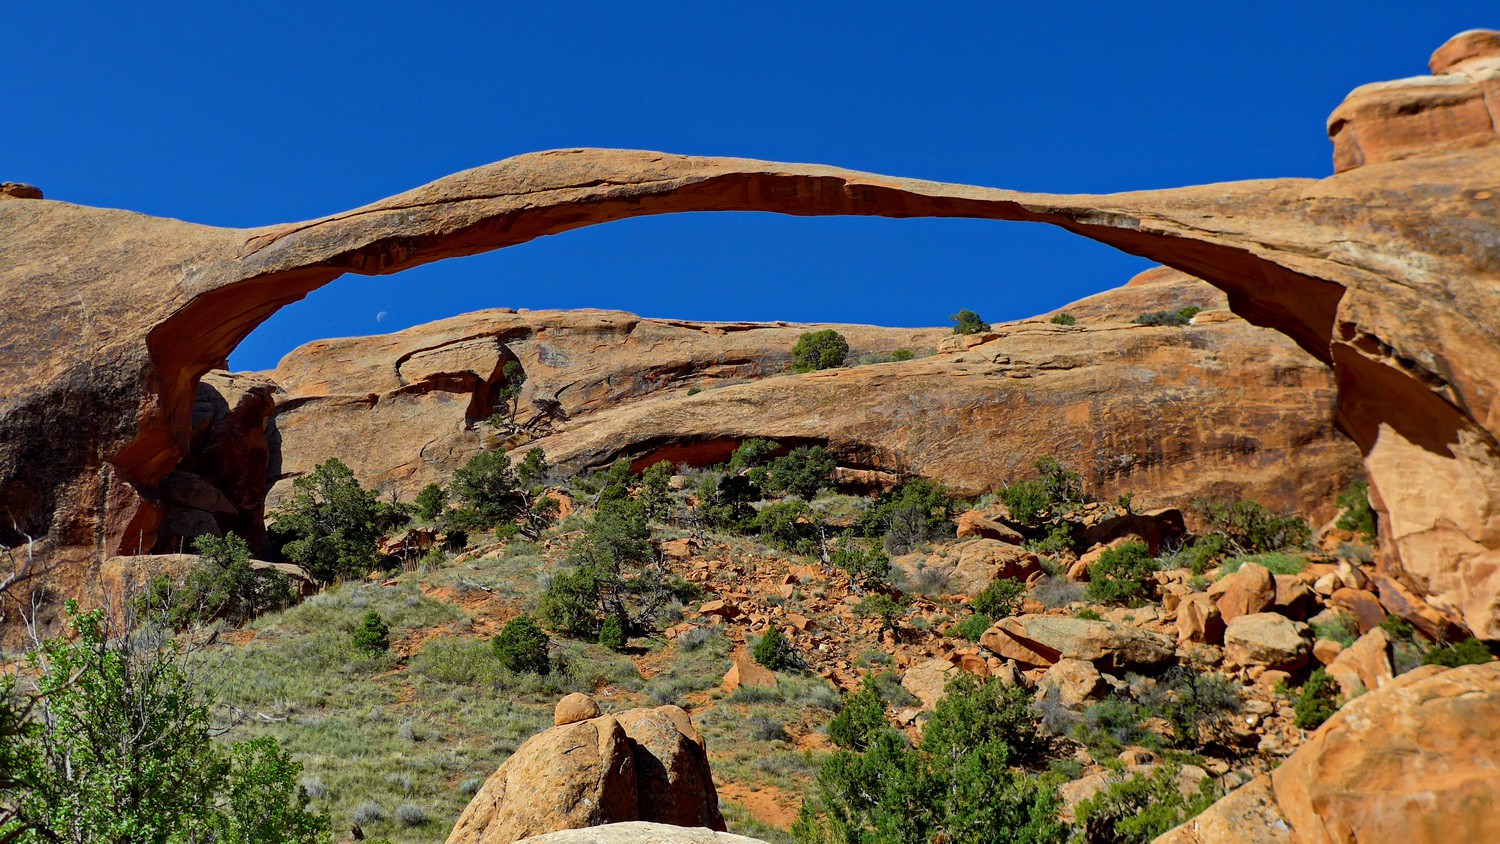 Landscape Arch which is with 88 meters span one of the largest on earth